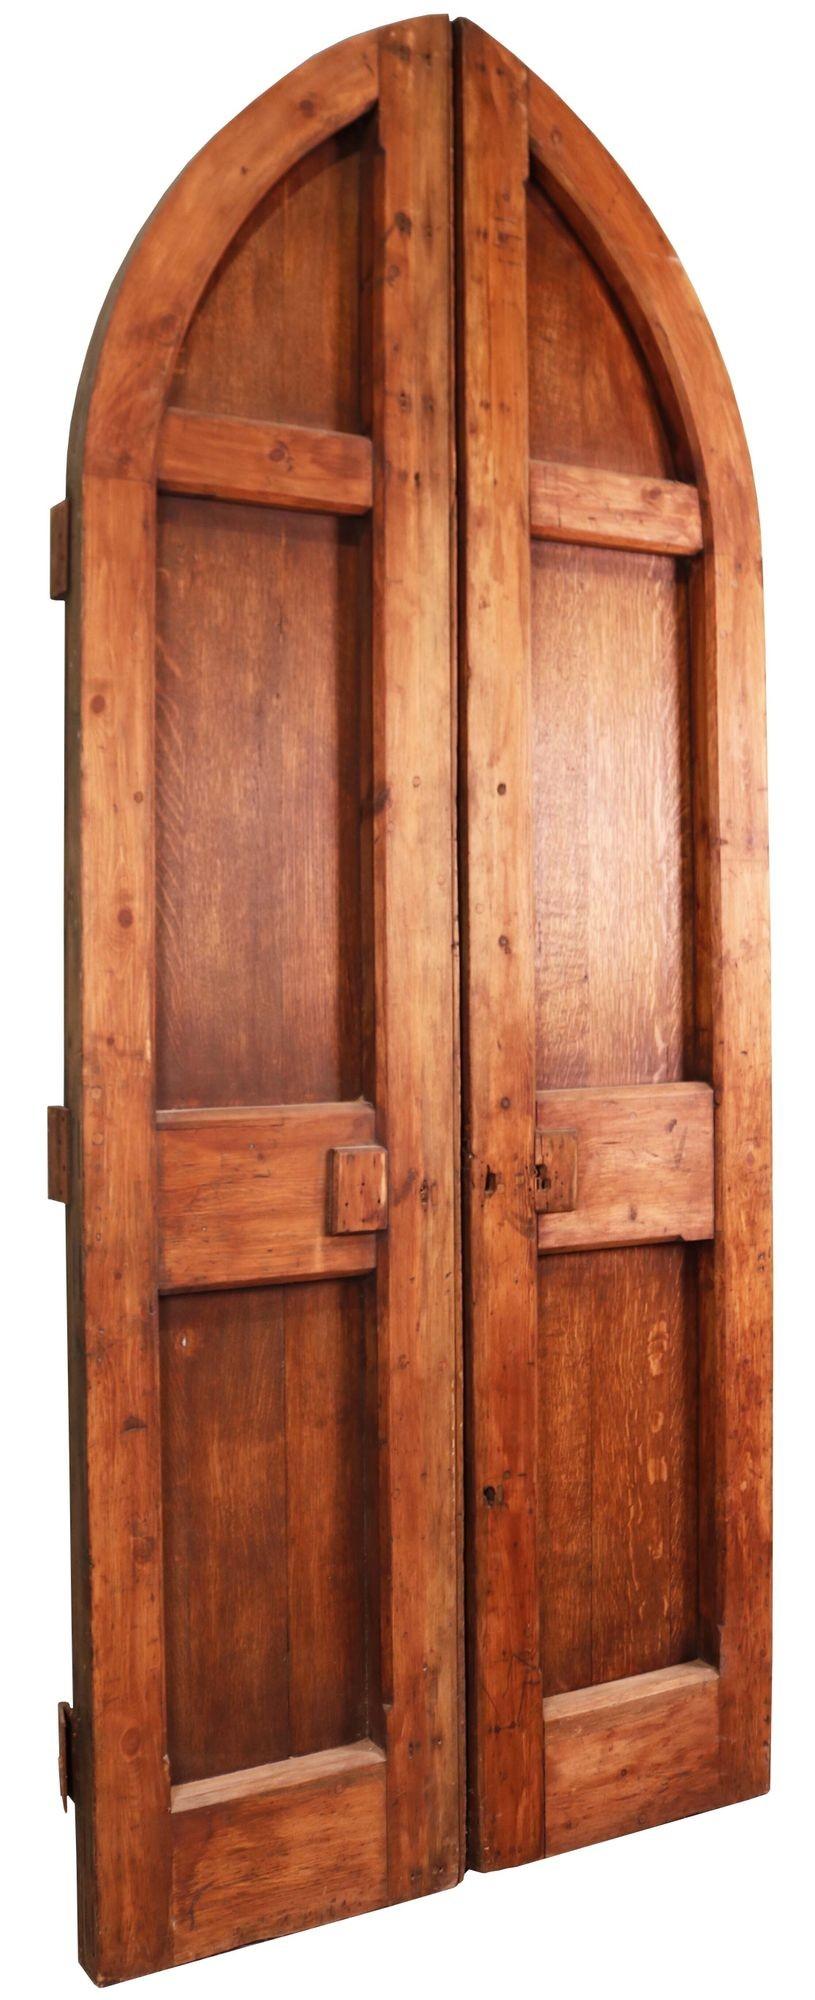 Set of Arched Oak Double Doors. A pair of Oak faced double doors with a Pine frame. Beautifully arched in a Victorian, Ecclesiastical style.